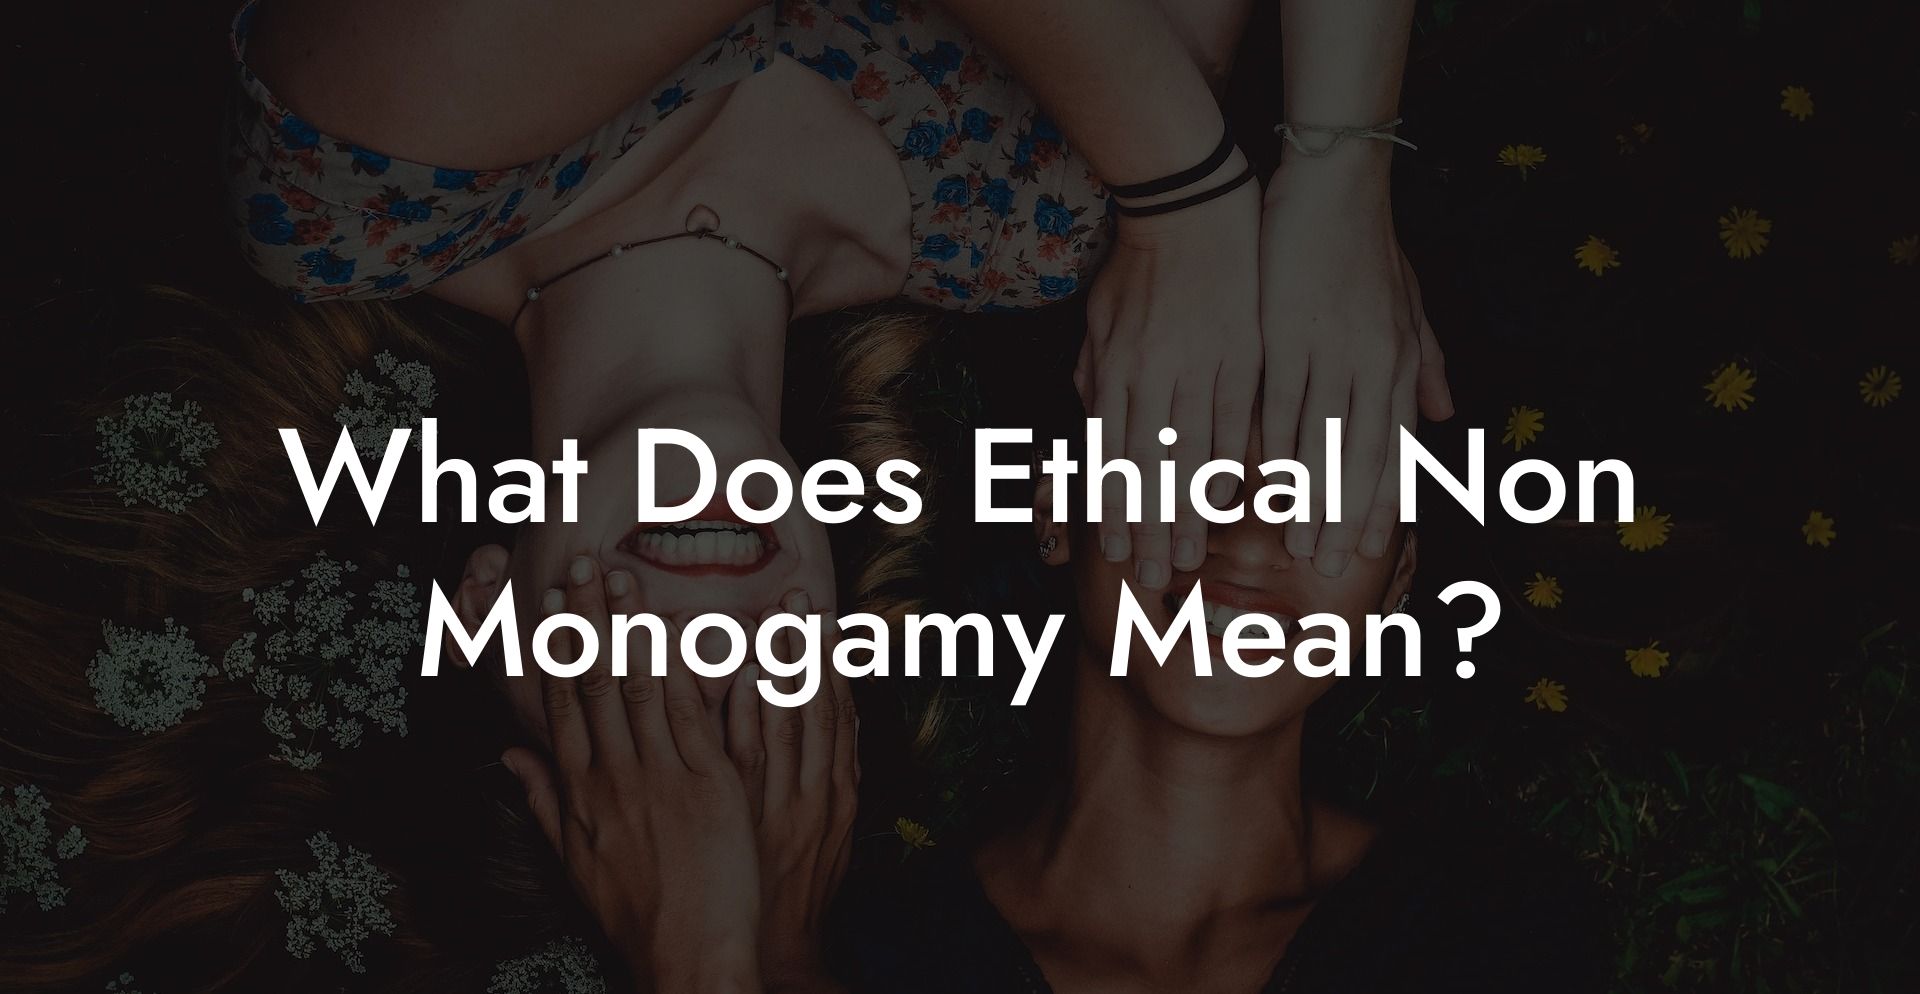 What Does Ethical Non Monogamy Mean?